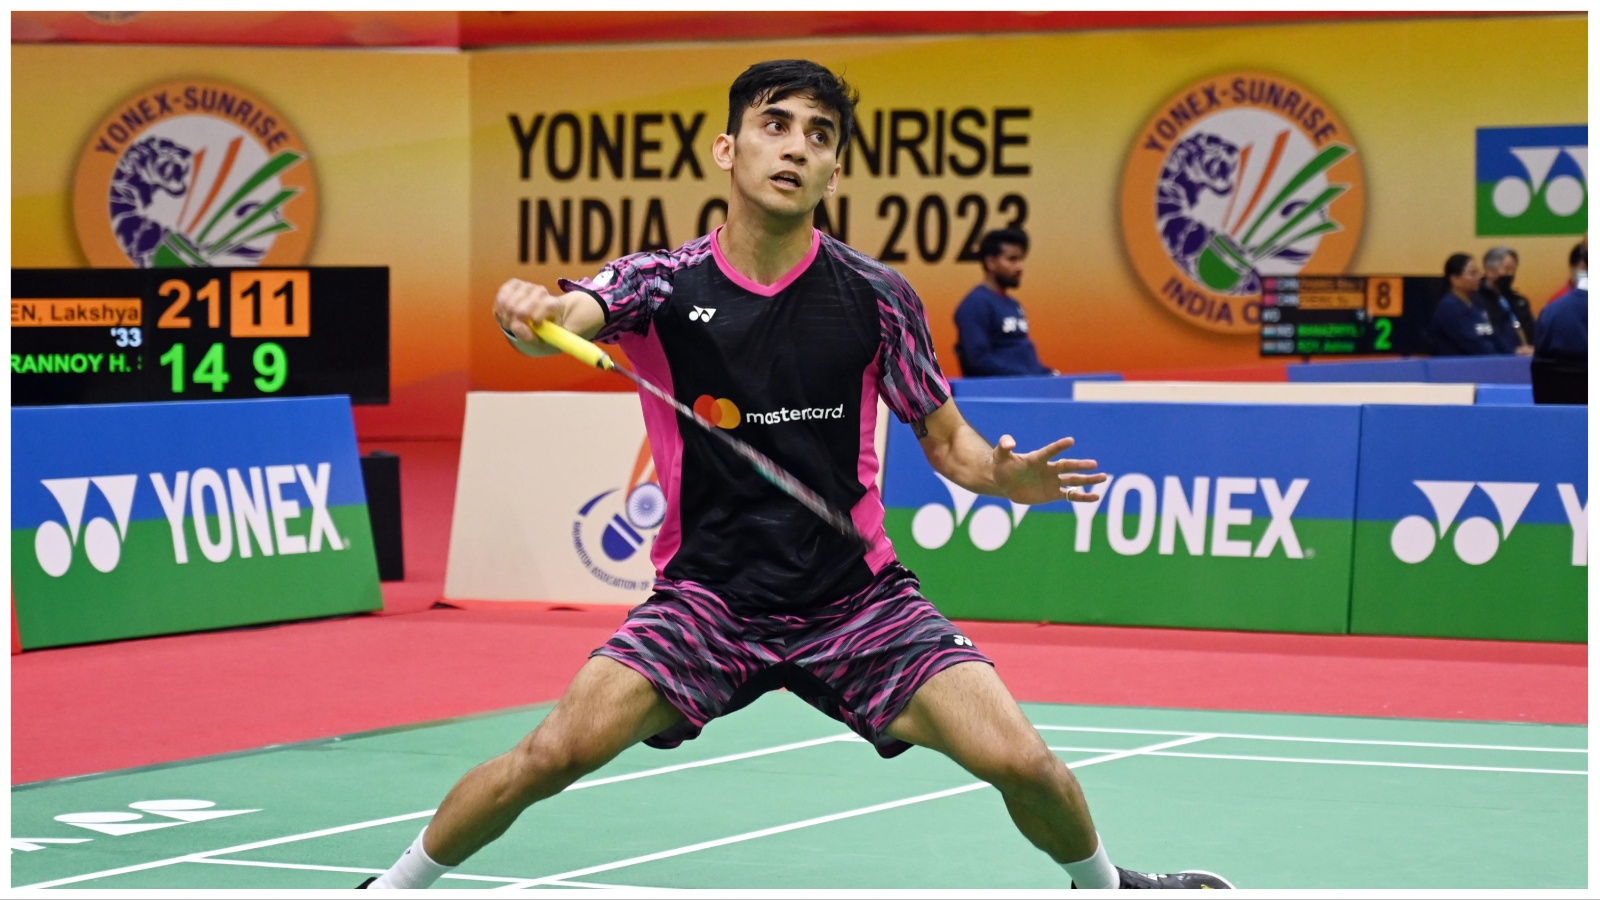 China Masters Super 750 badminton: Lakshya Sen, Srikanth Kidambi continue to struggle for consistency after first-round exits | Badminton News